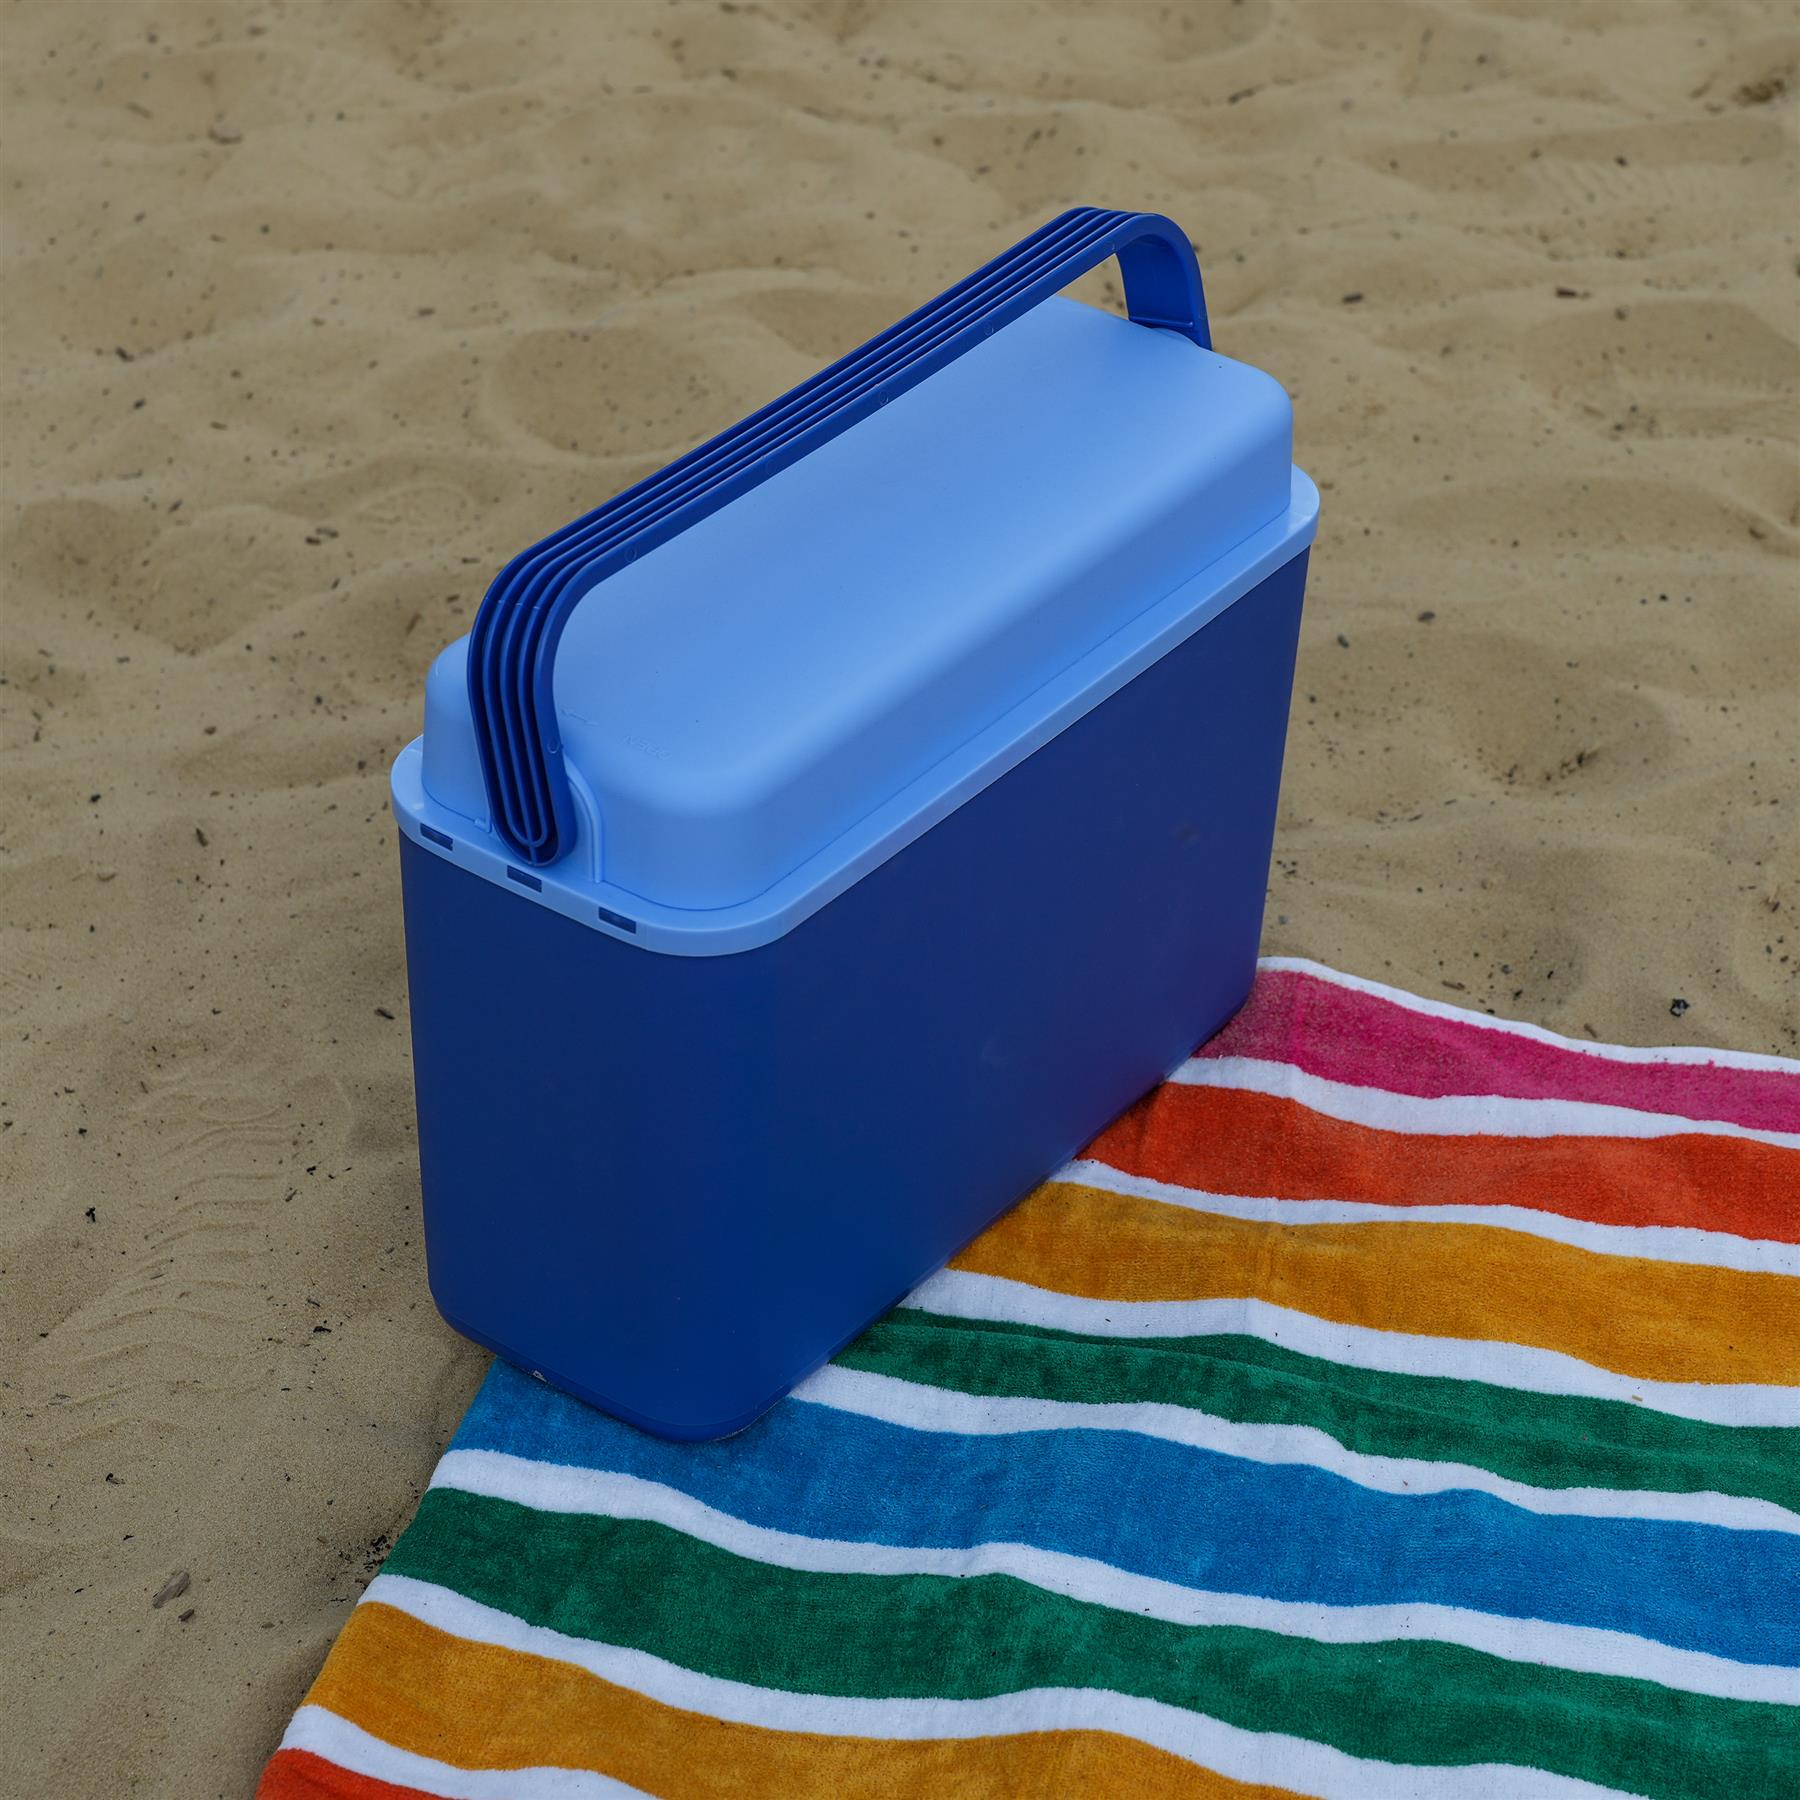 GEEZY Cool Box Large Camping 12L Cooler Box